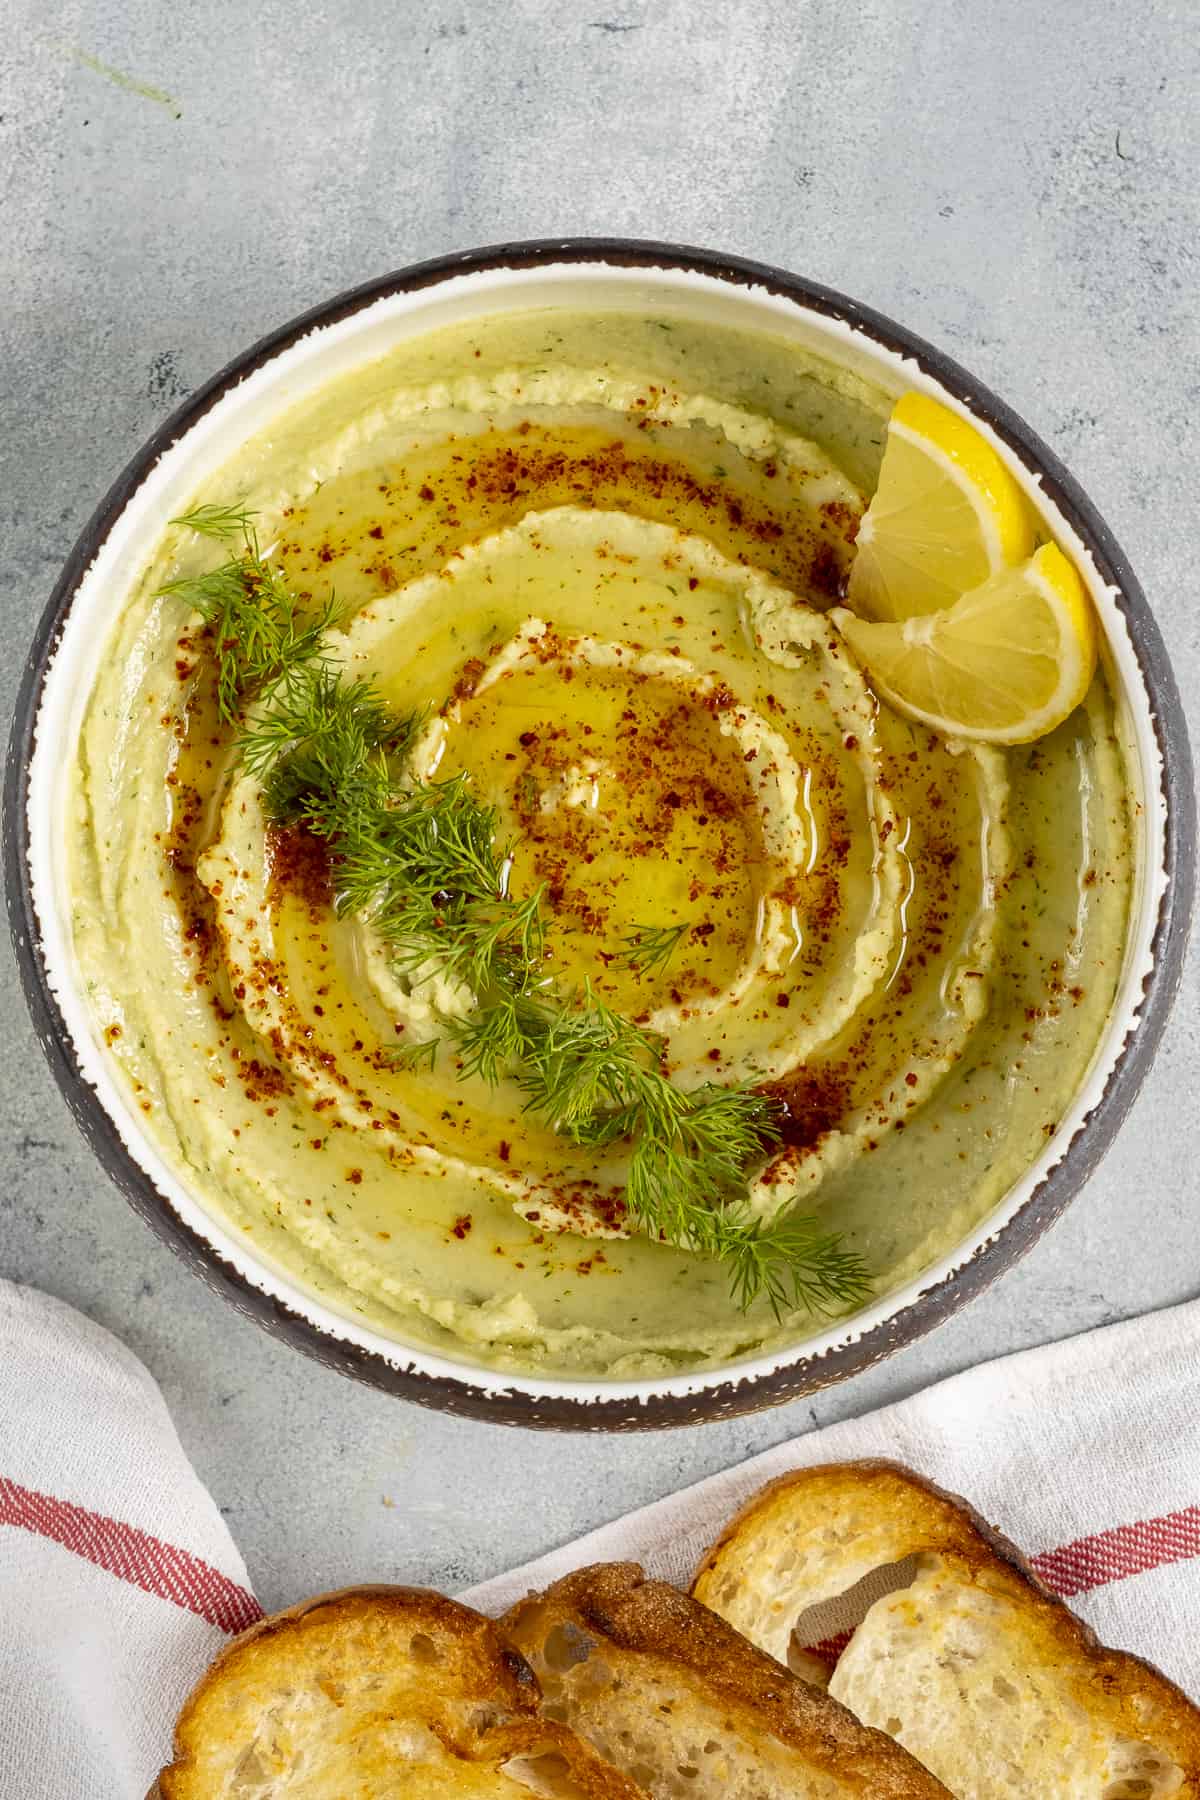 Fava bean dip garnished with red pepper flakes and fresh dill.